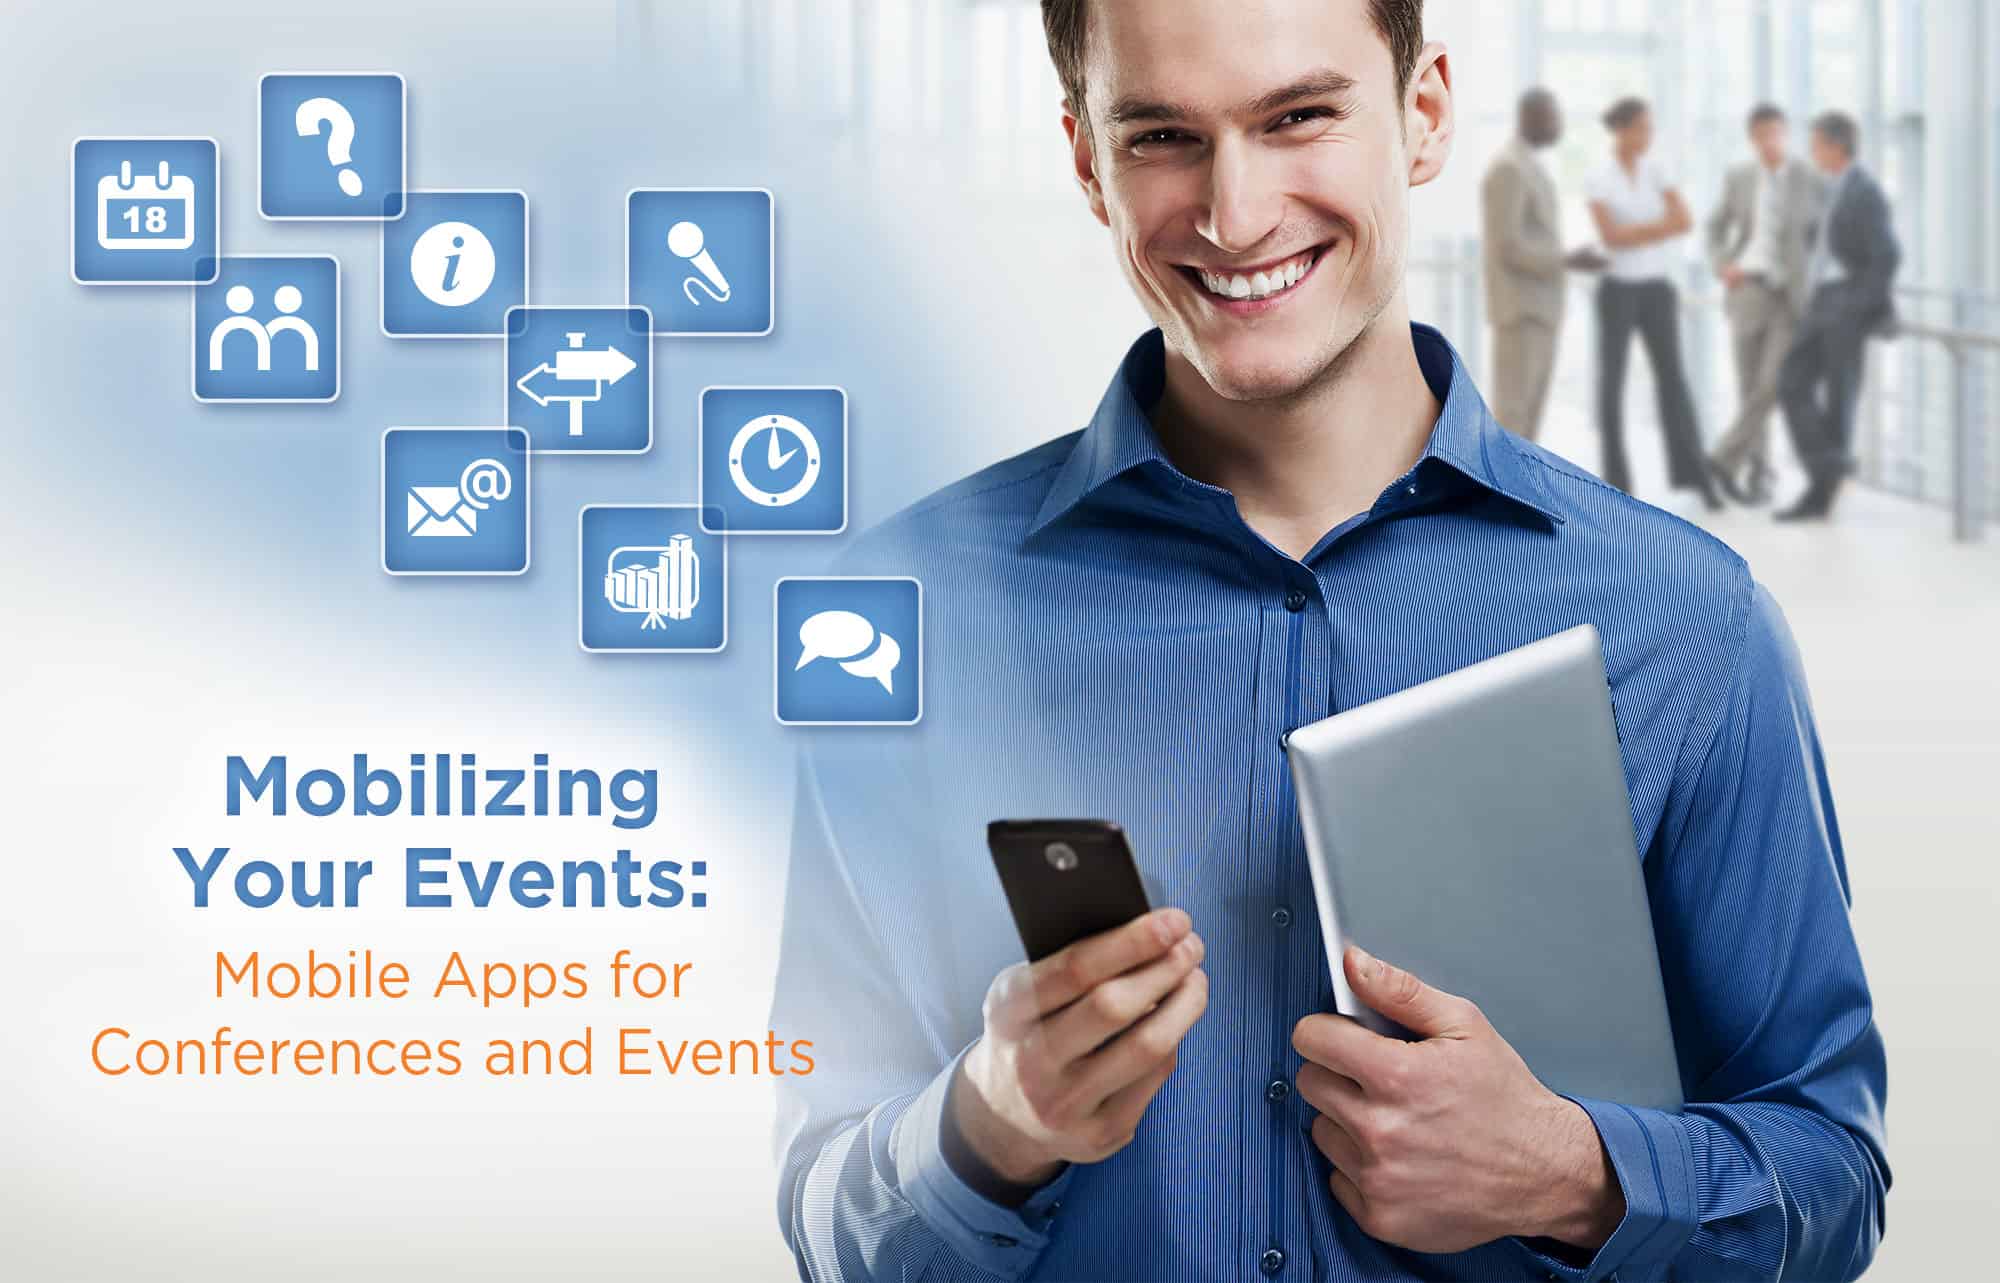 Mobilizing Your Events Mobile Apps for Conferences and Events